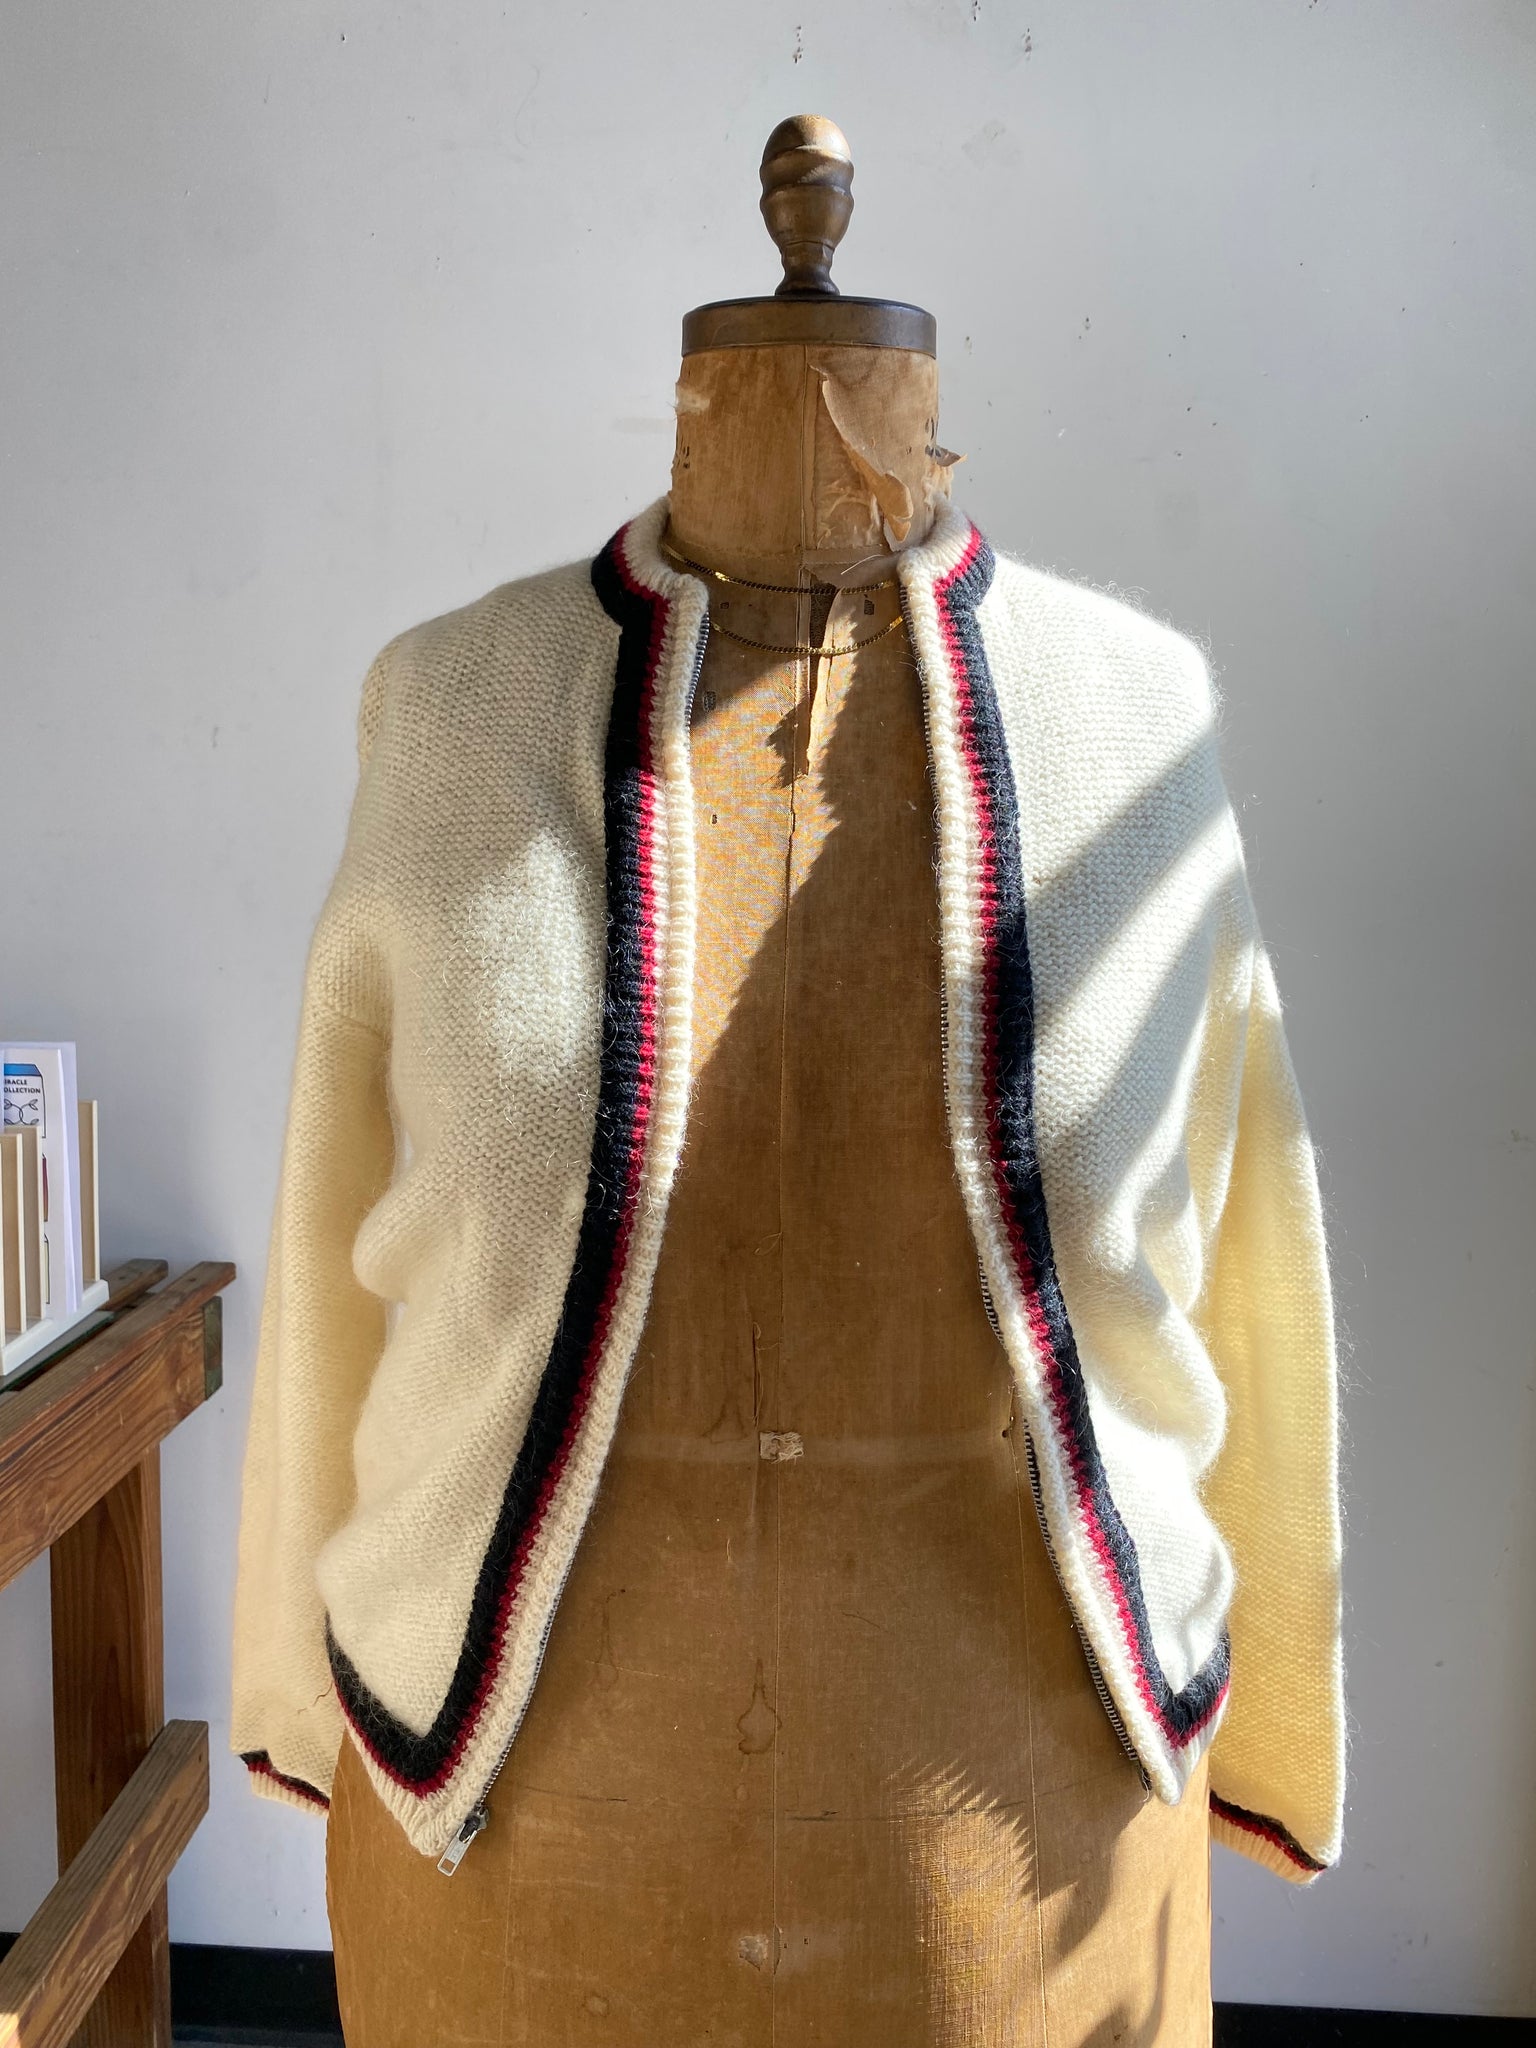 60s "McBriar" Wool and Mohair Knit Sweater